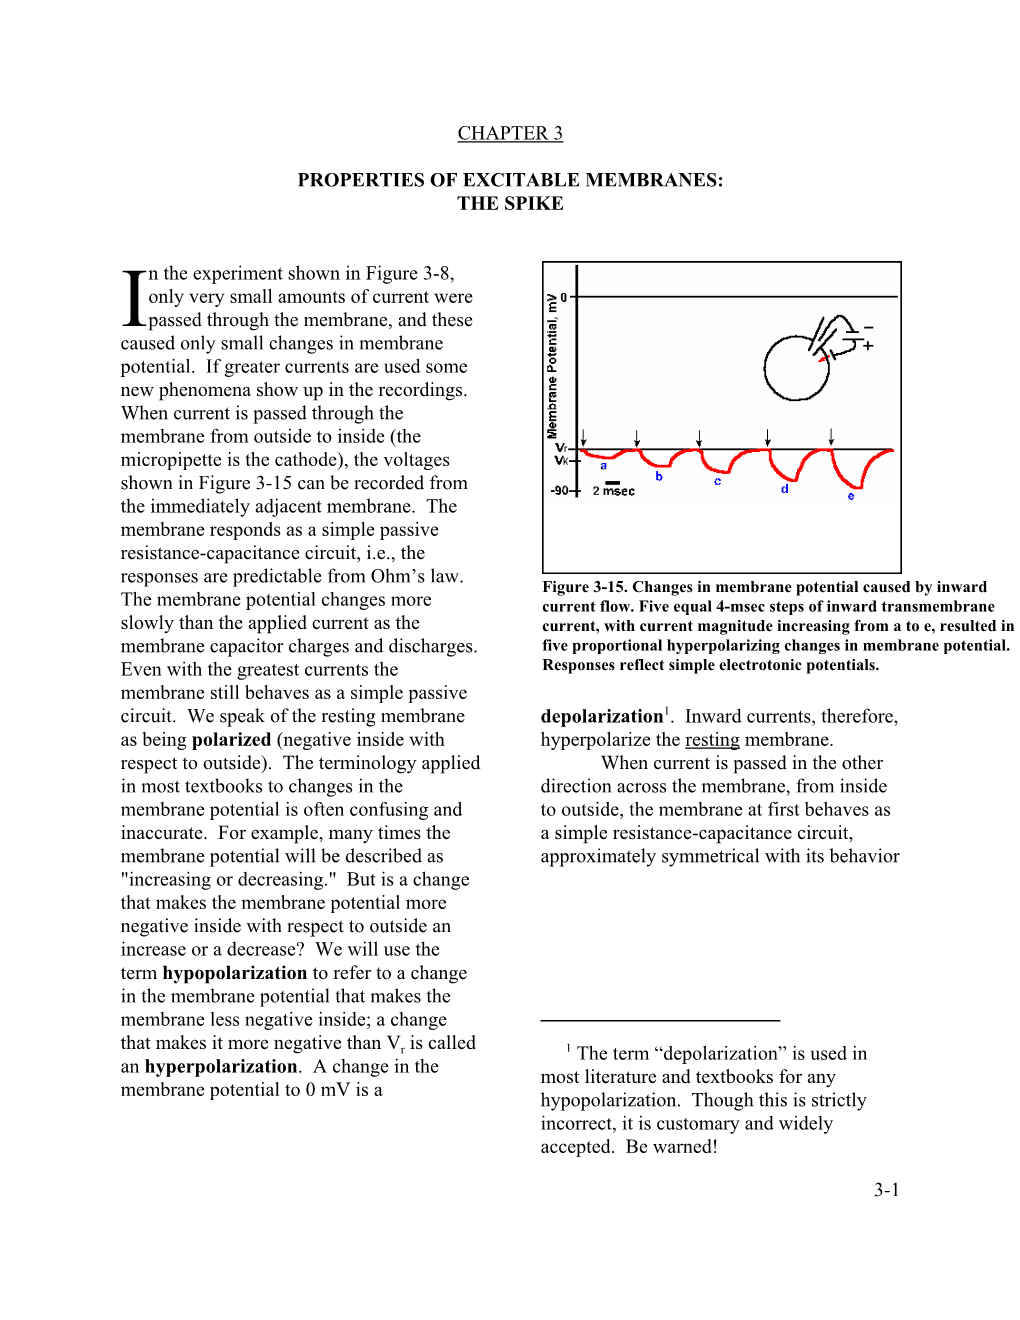 THE SPIKE in the Experiment Shown in Figure 3-8, Only Very Small Amounts Of